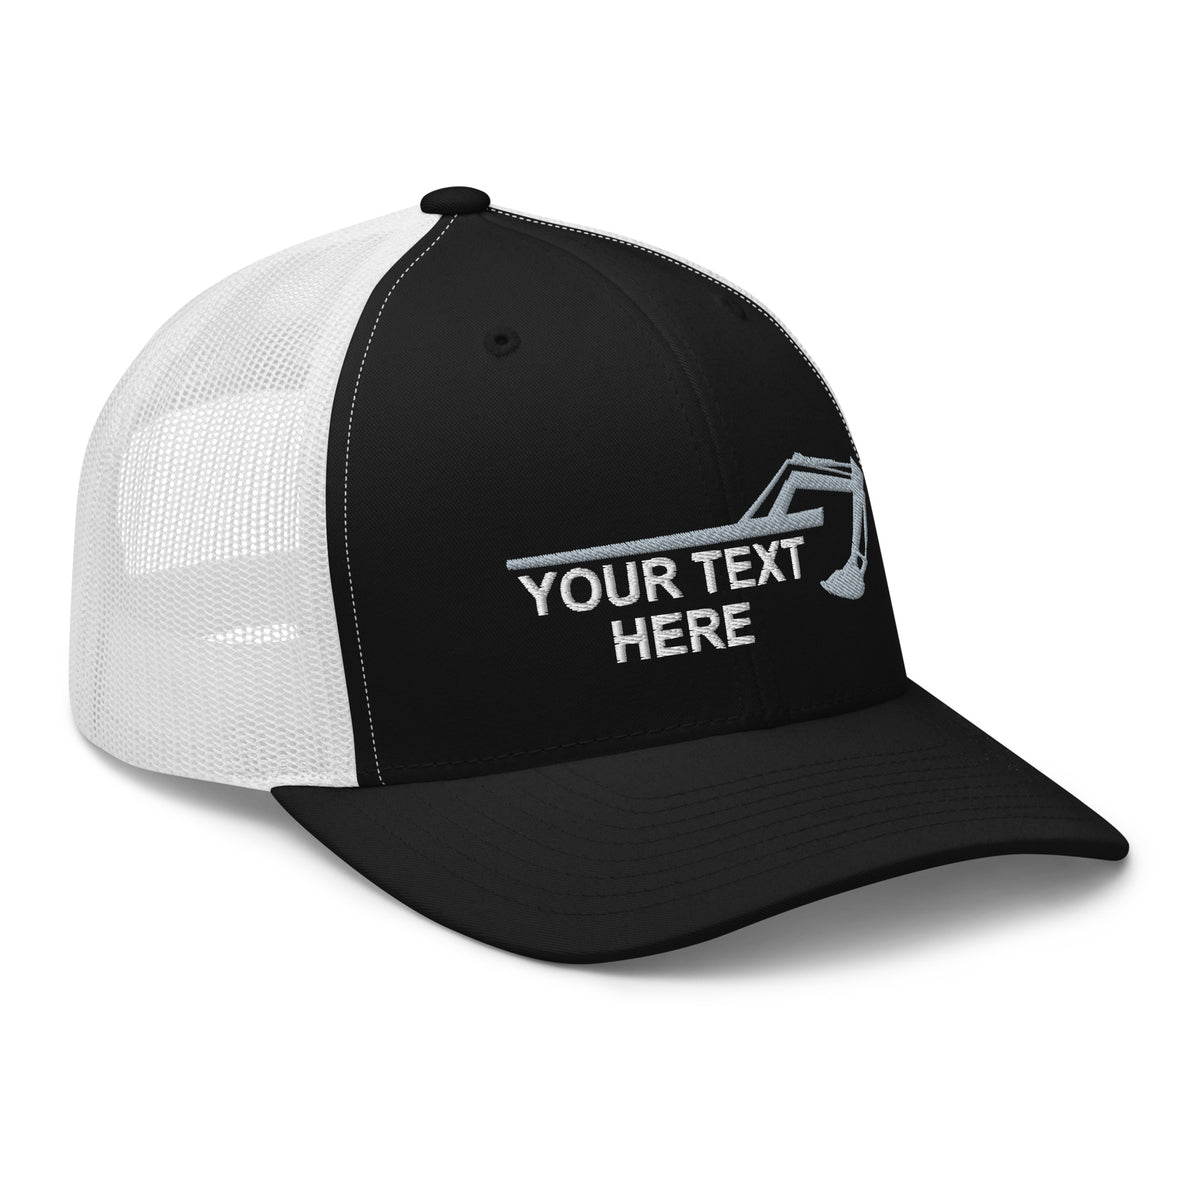 2 Embroidered Hats - Excavator Arm Bucket - Your Text Here - Free Shipping